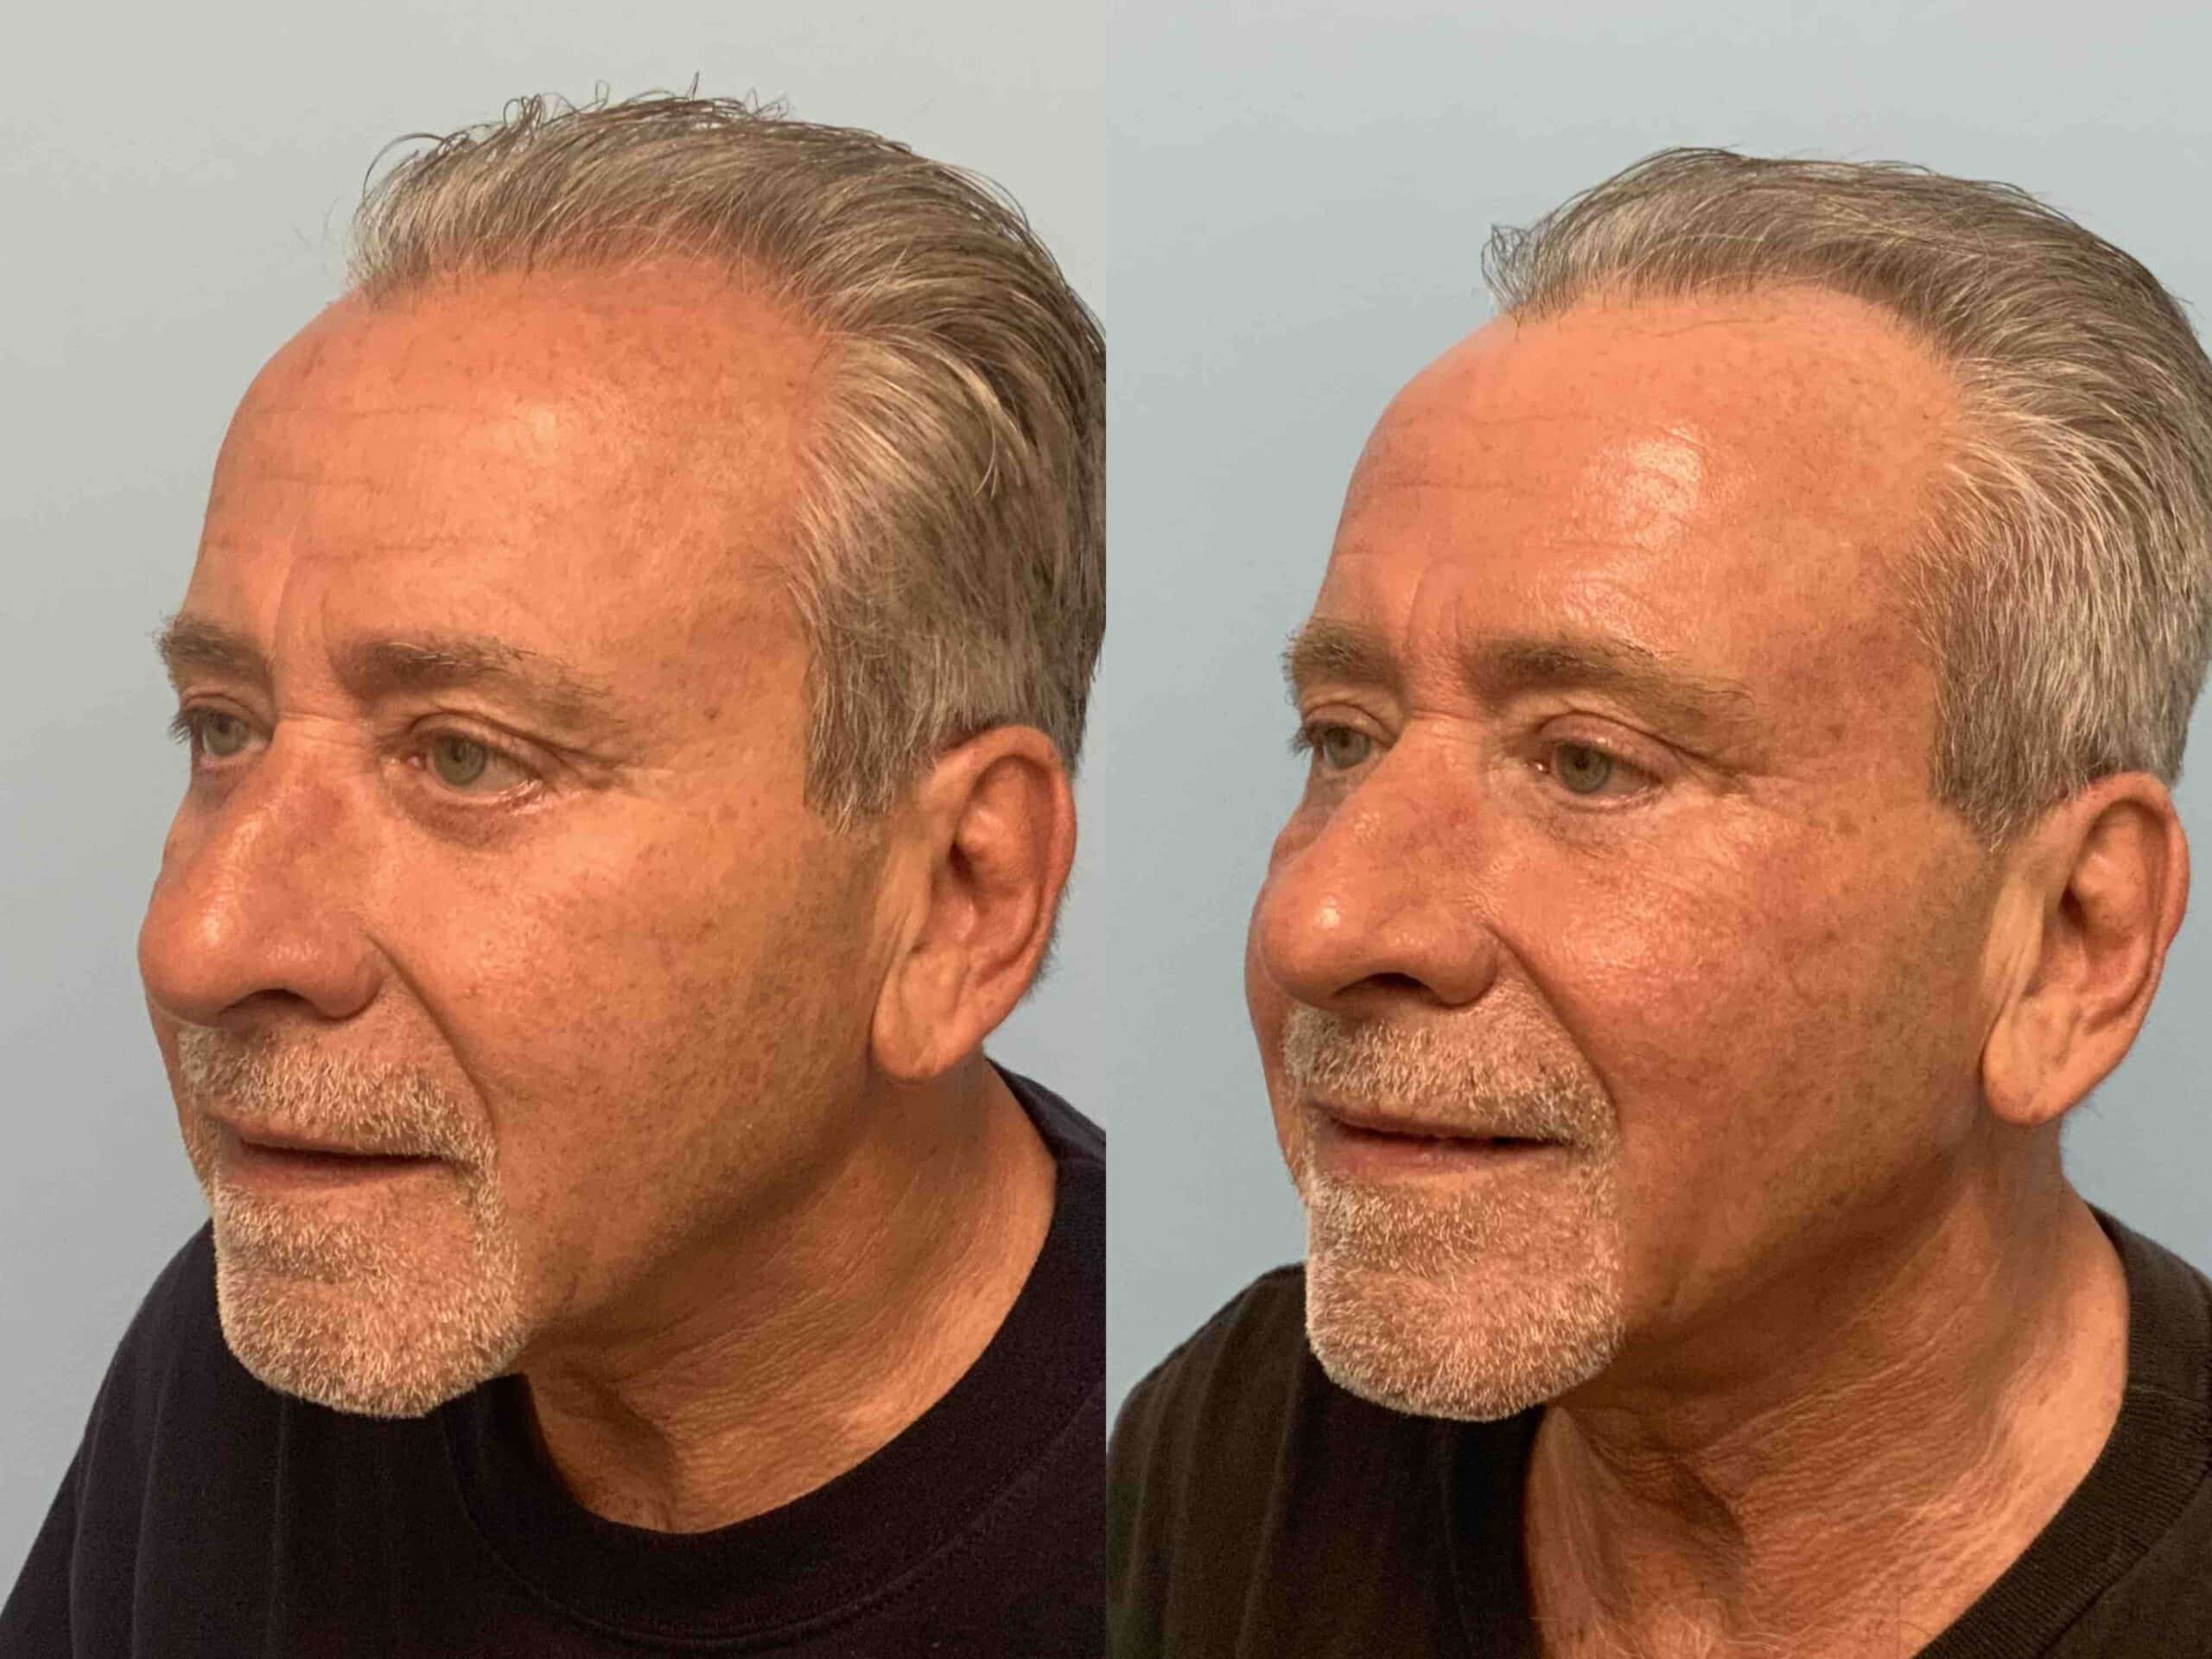 Before and after, 11 months post op from Lower Lid Blepharoplasty/Canthopexy, Sculptra Injectable, performed by Dr. Paul Vanek (diagonal view)